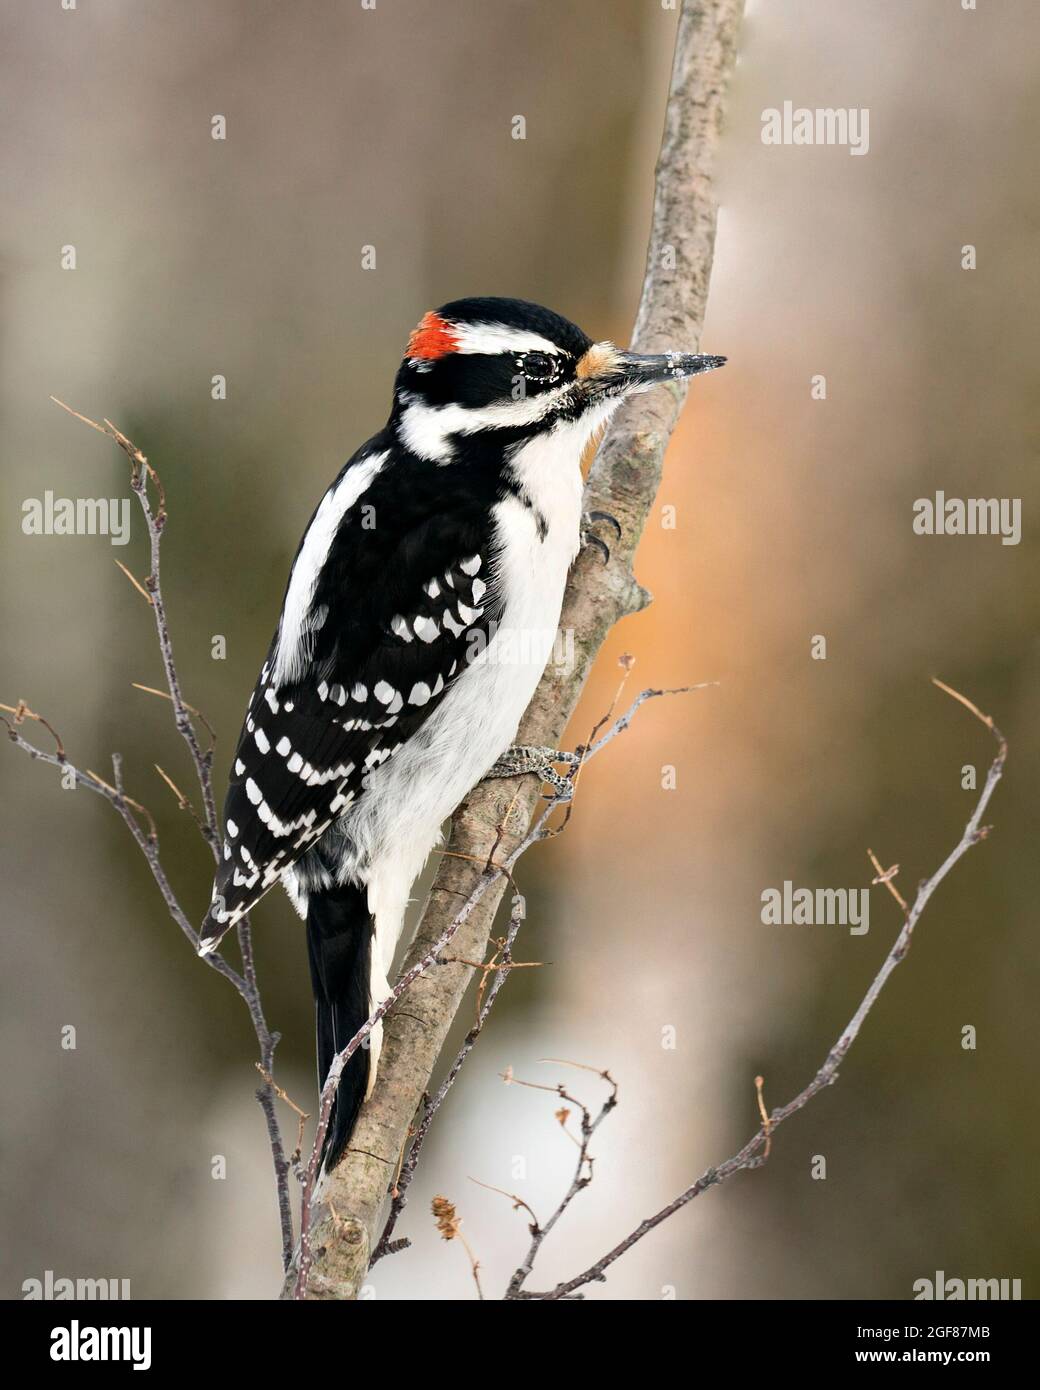 Woodpecker male close-up profile view perched on a tree branch with blur background in its environment and habitat. Image. Picture. Stock Photo